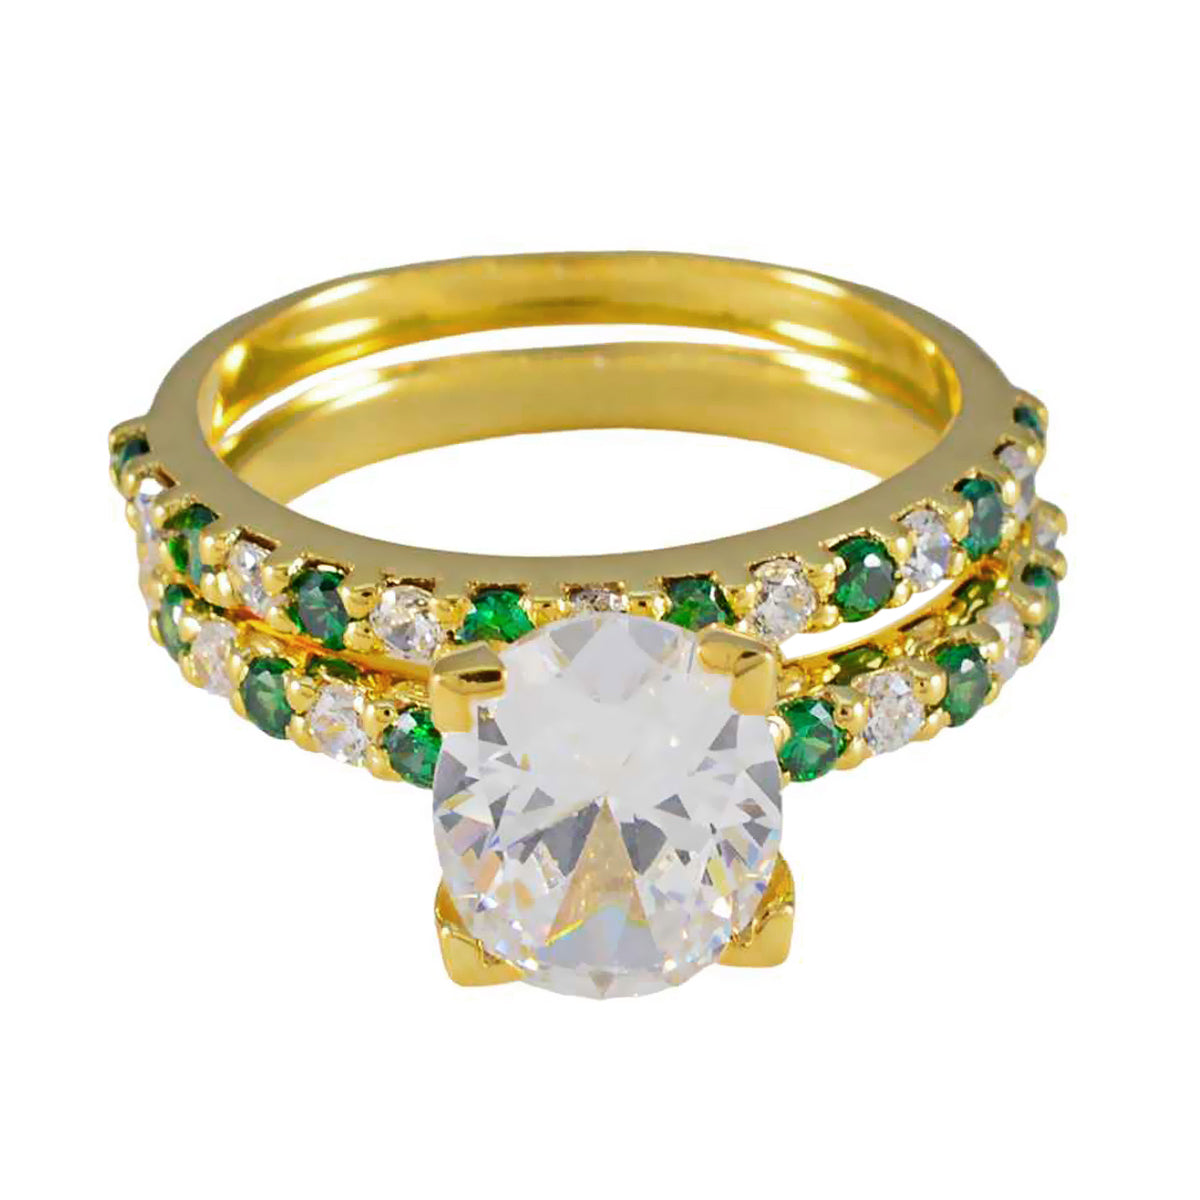 Riyo Excellent Silver Ring With Yellow Gold Plating Emerald CZ Stone Oval Shape Prong Setting Designer Jewelry Valentines Day Ring